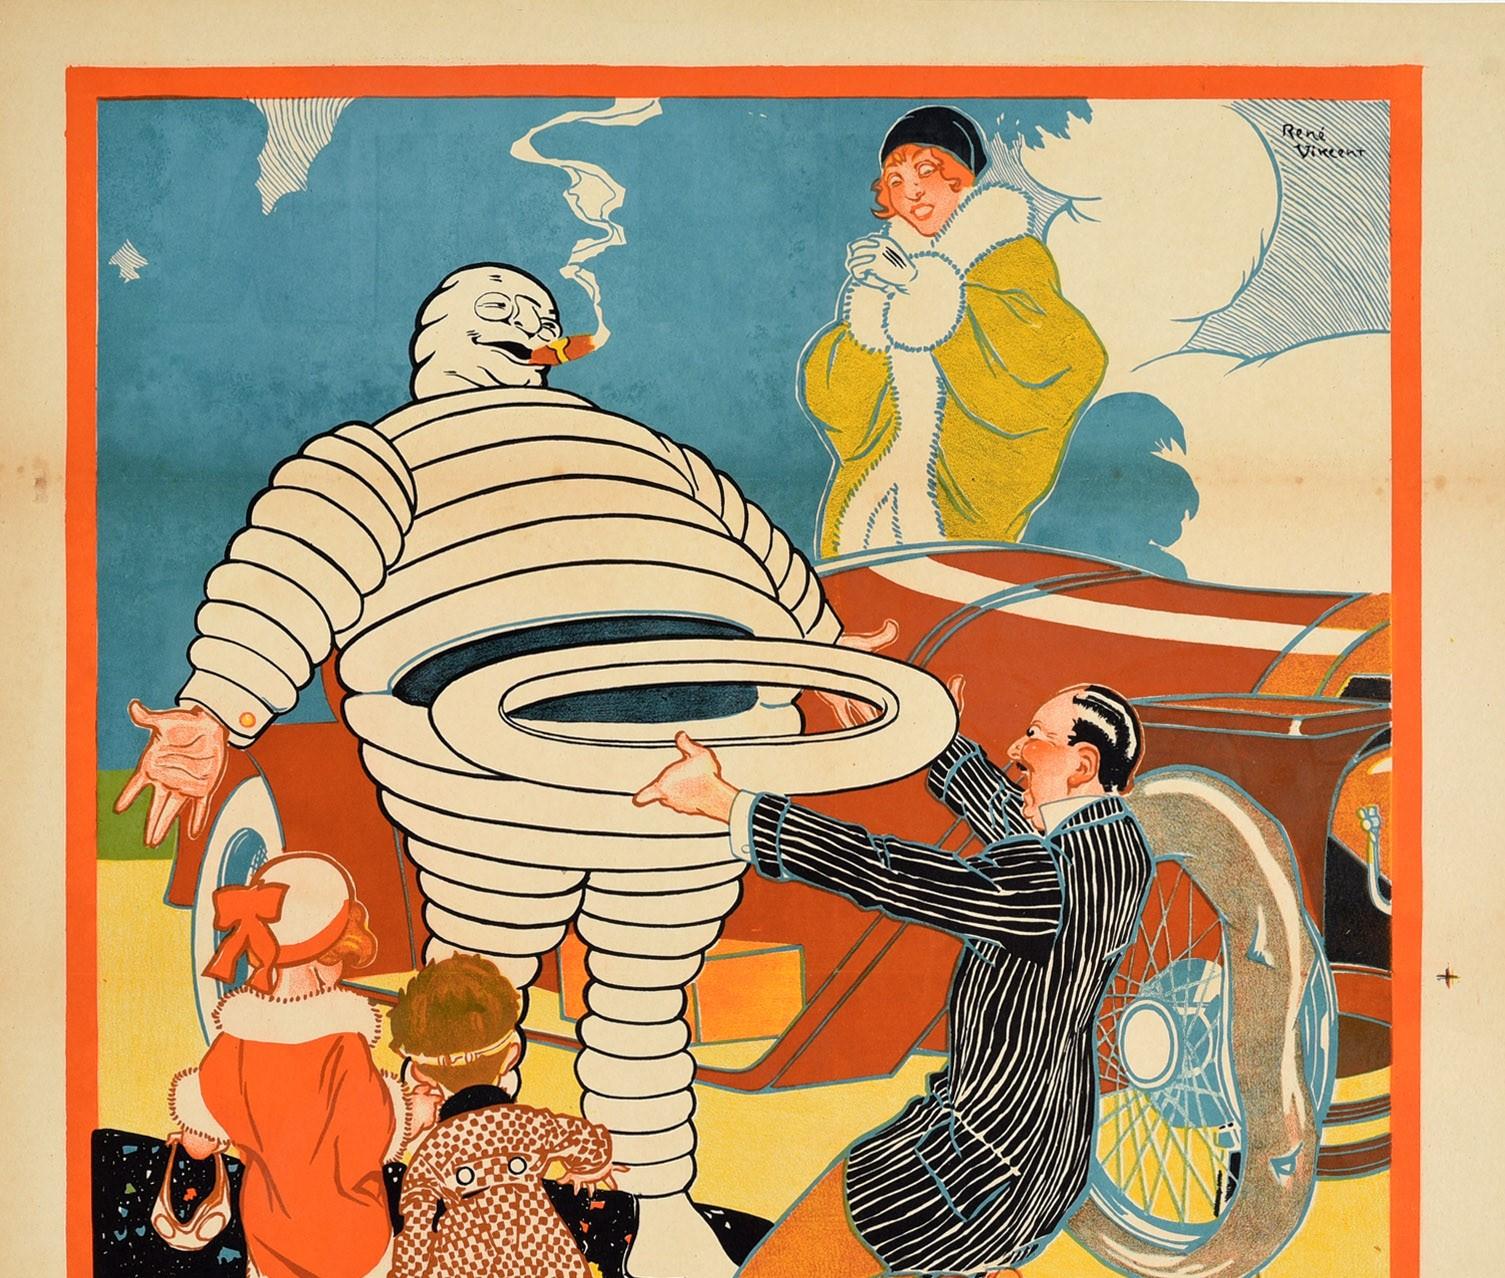 Original antique advertising poster for Michelin tyres featuring a great illustration by Rene Vincent (1879-1936) showing the trademark Bibendum character - the iconic Michelin Man figure made from tires - smoking a cigar and smiling as he offers a